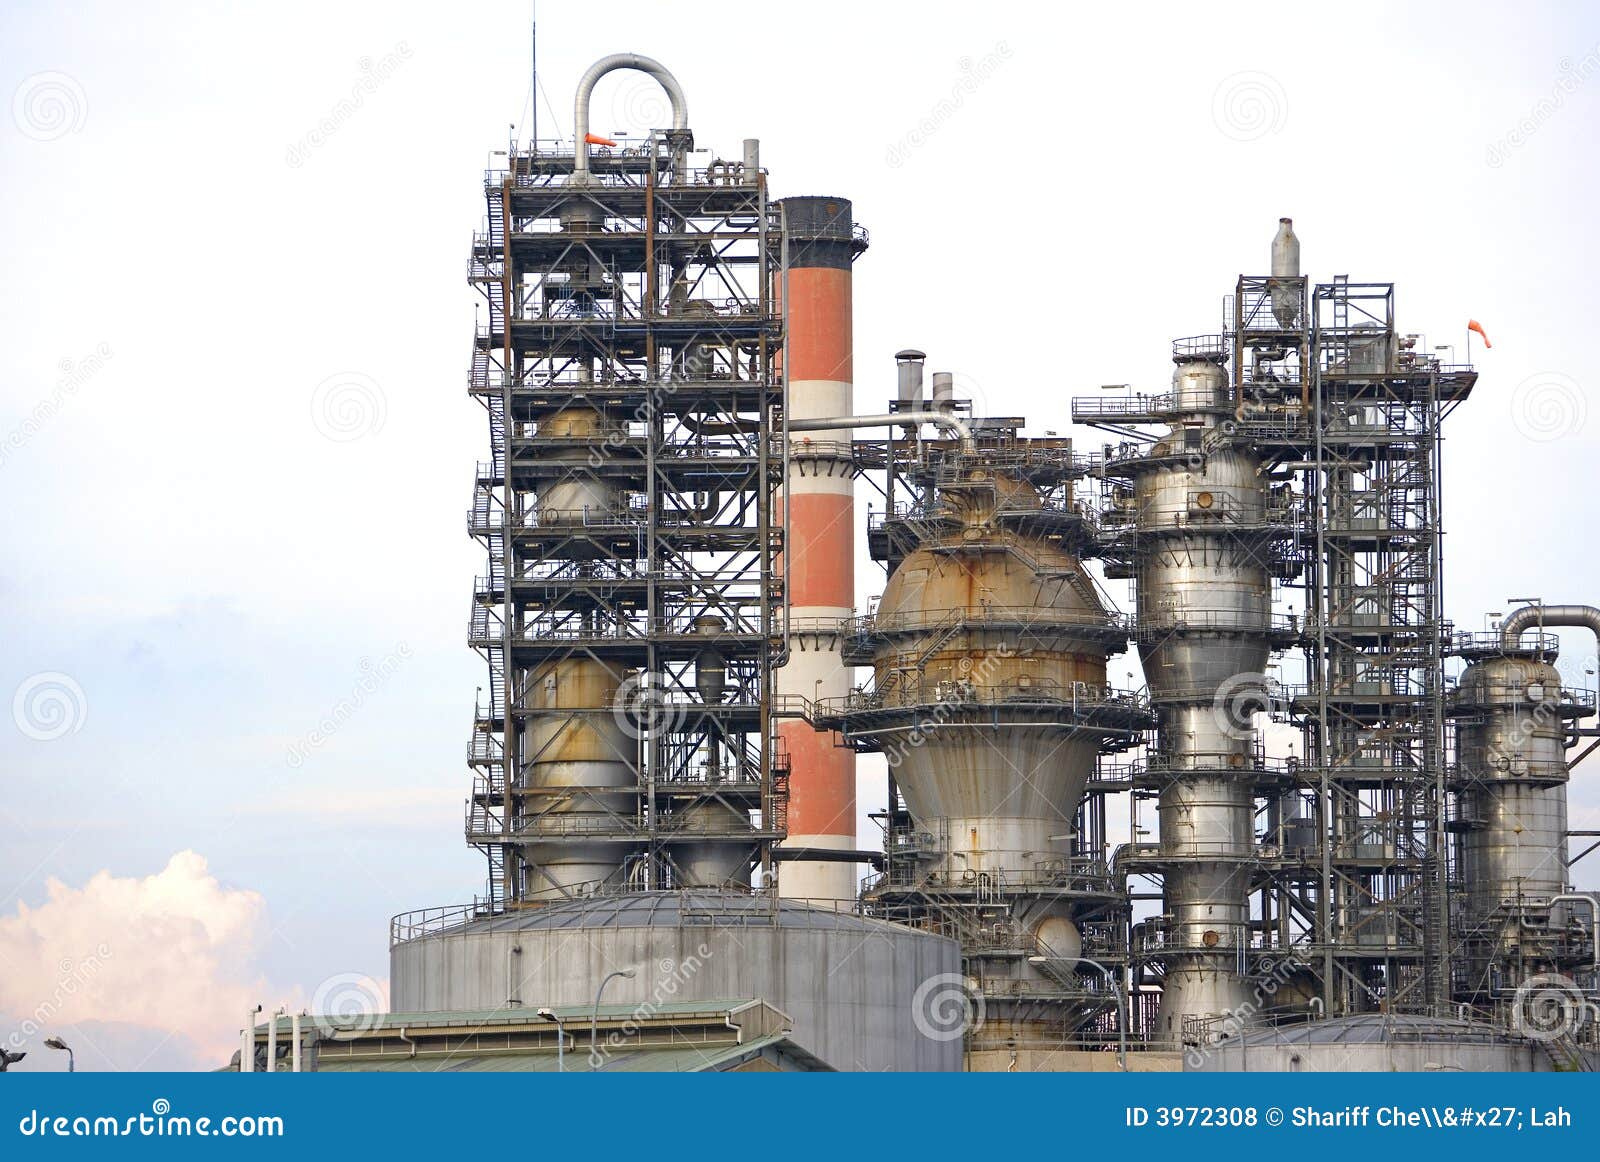 Image of oil refinery equipment in Malaysia.